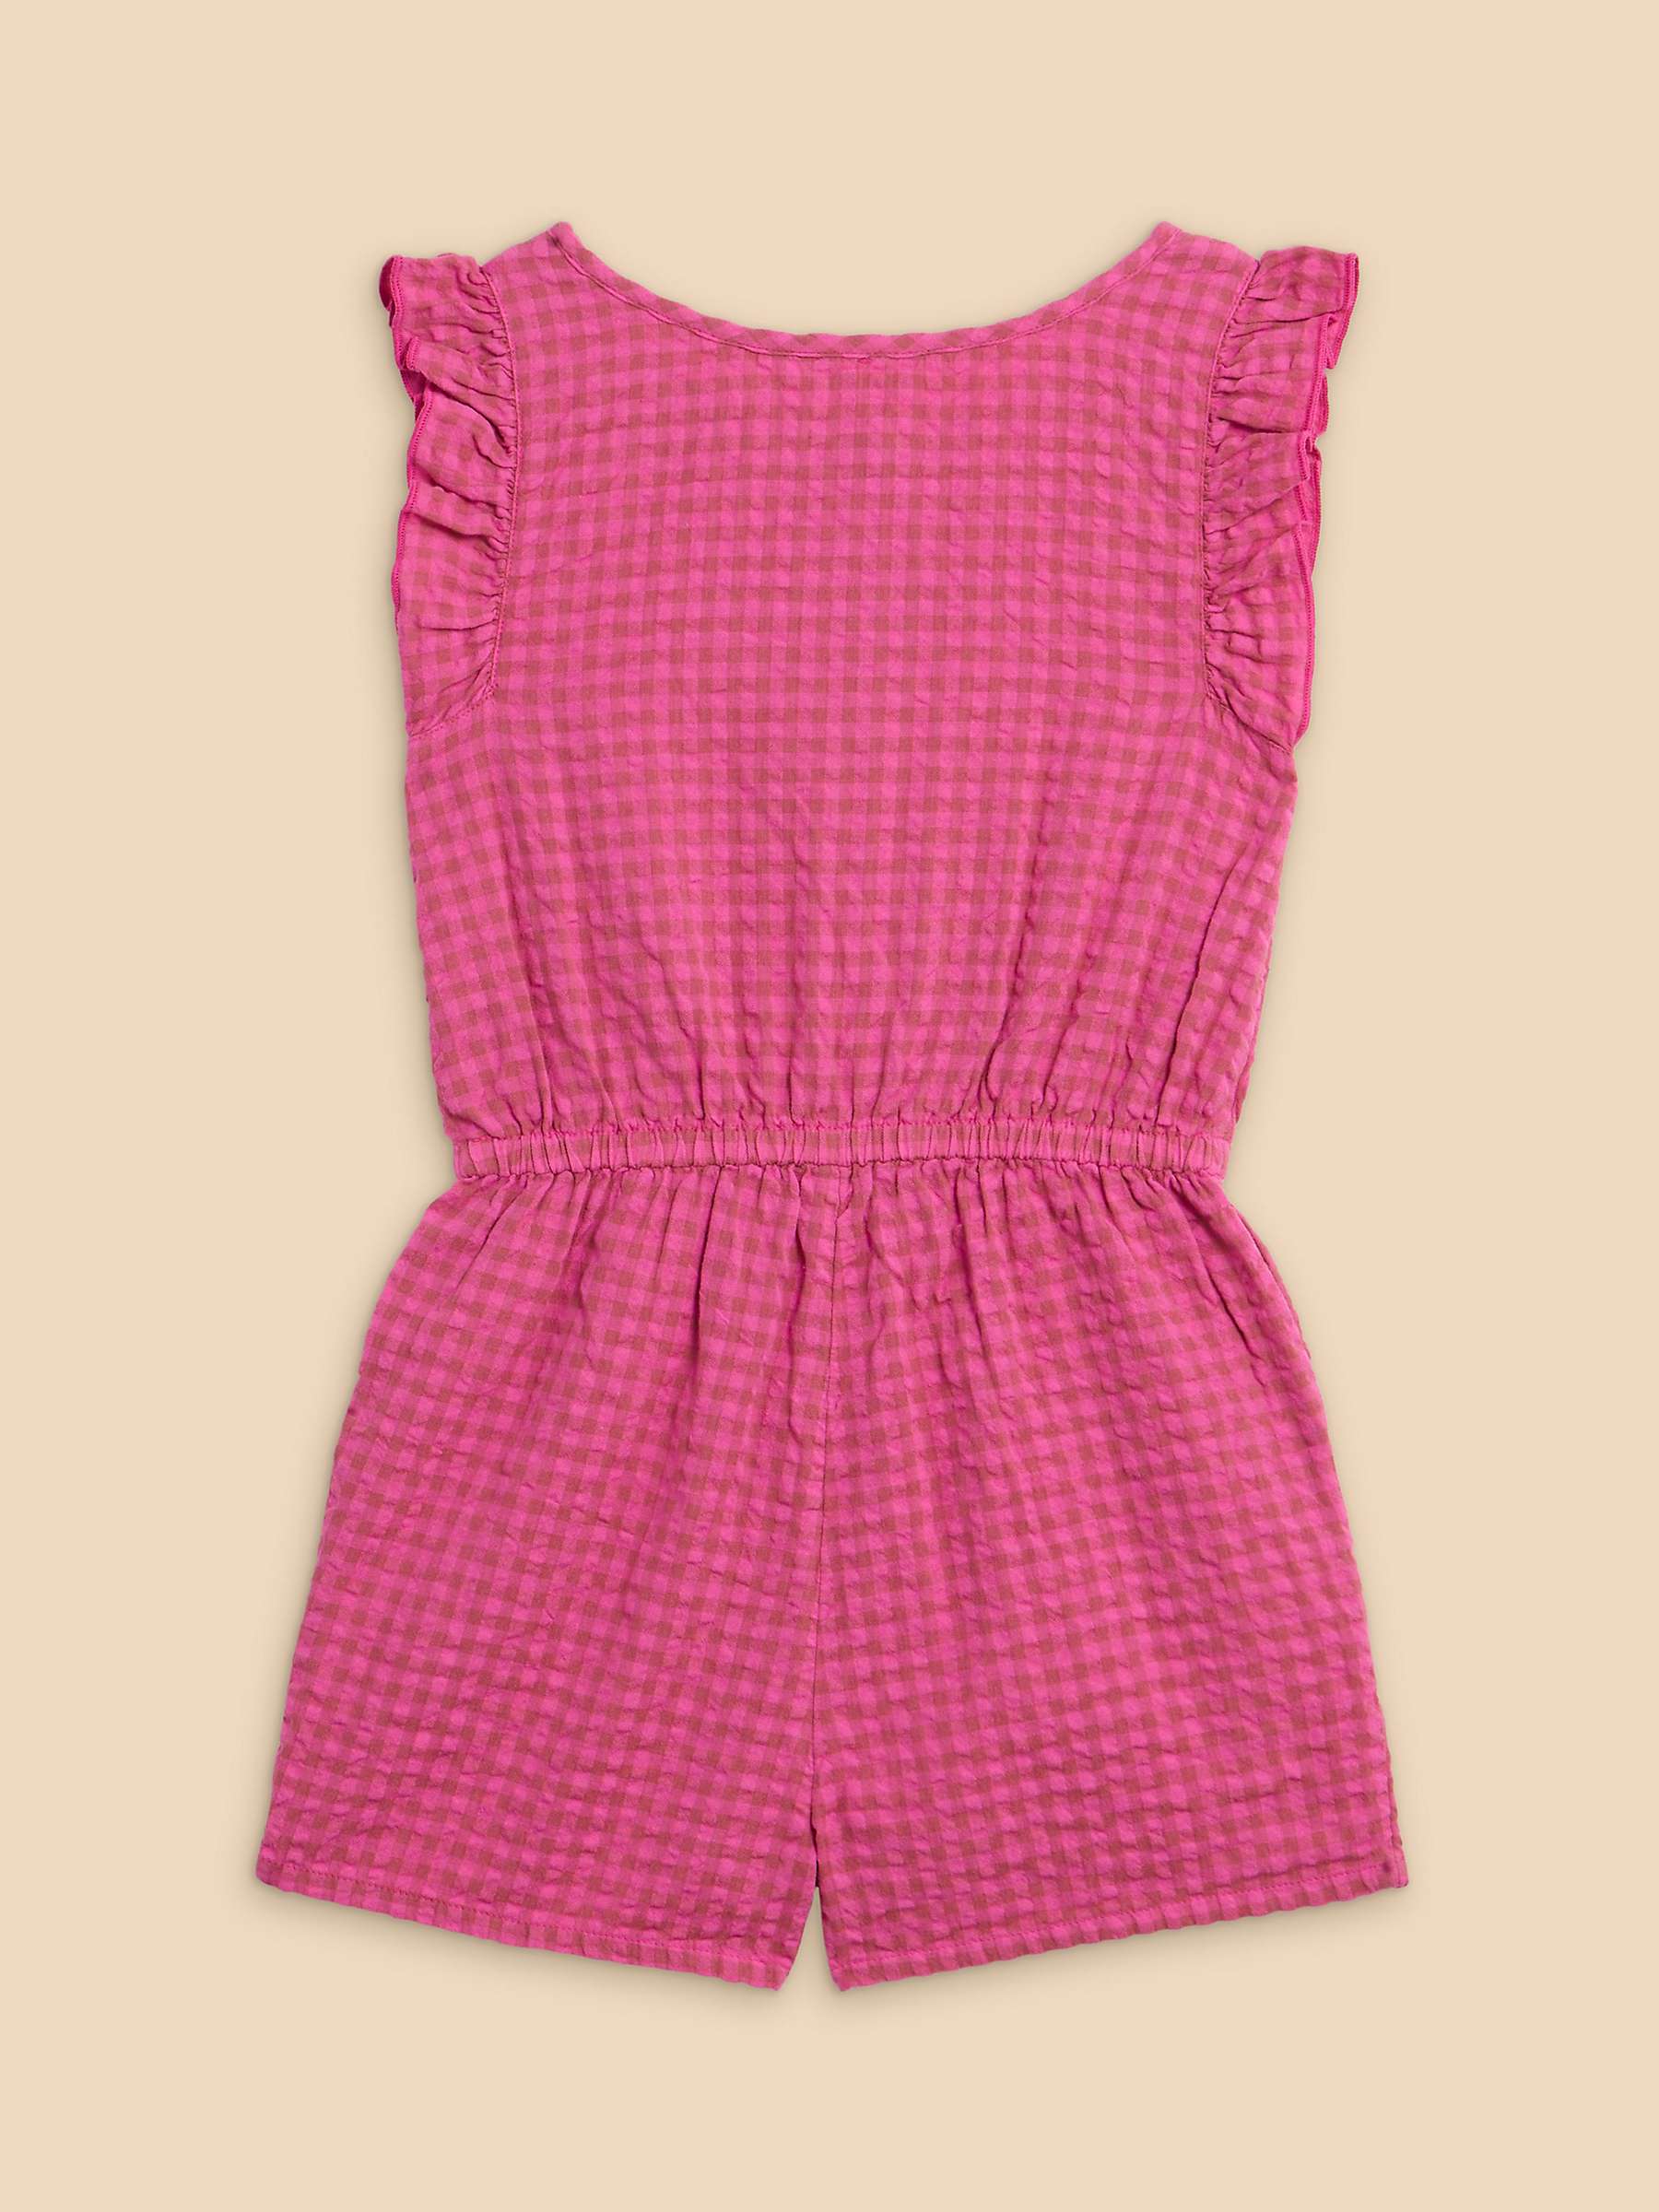 Buy White Stuff Kids' Gingham Playsuit, Dusty Pink Online at johnlewis.com